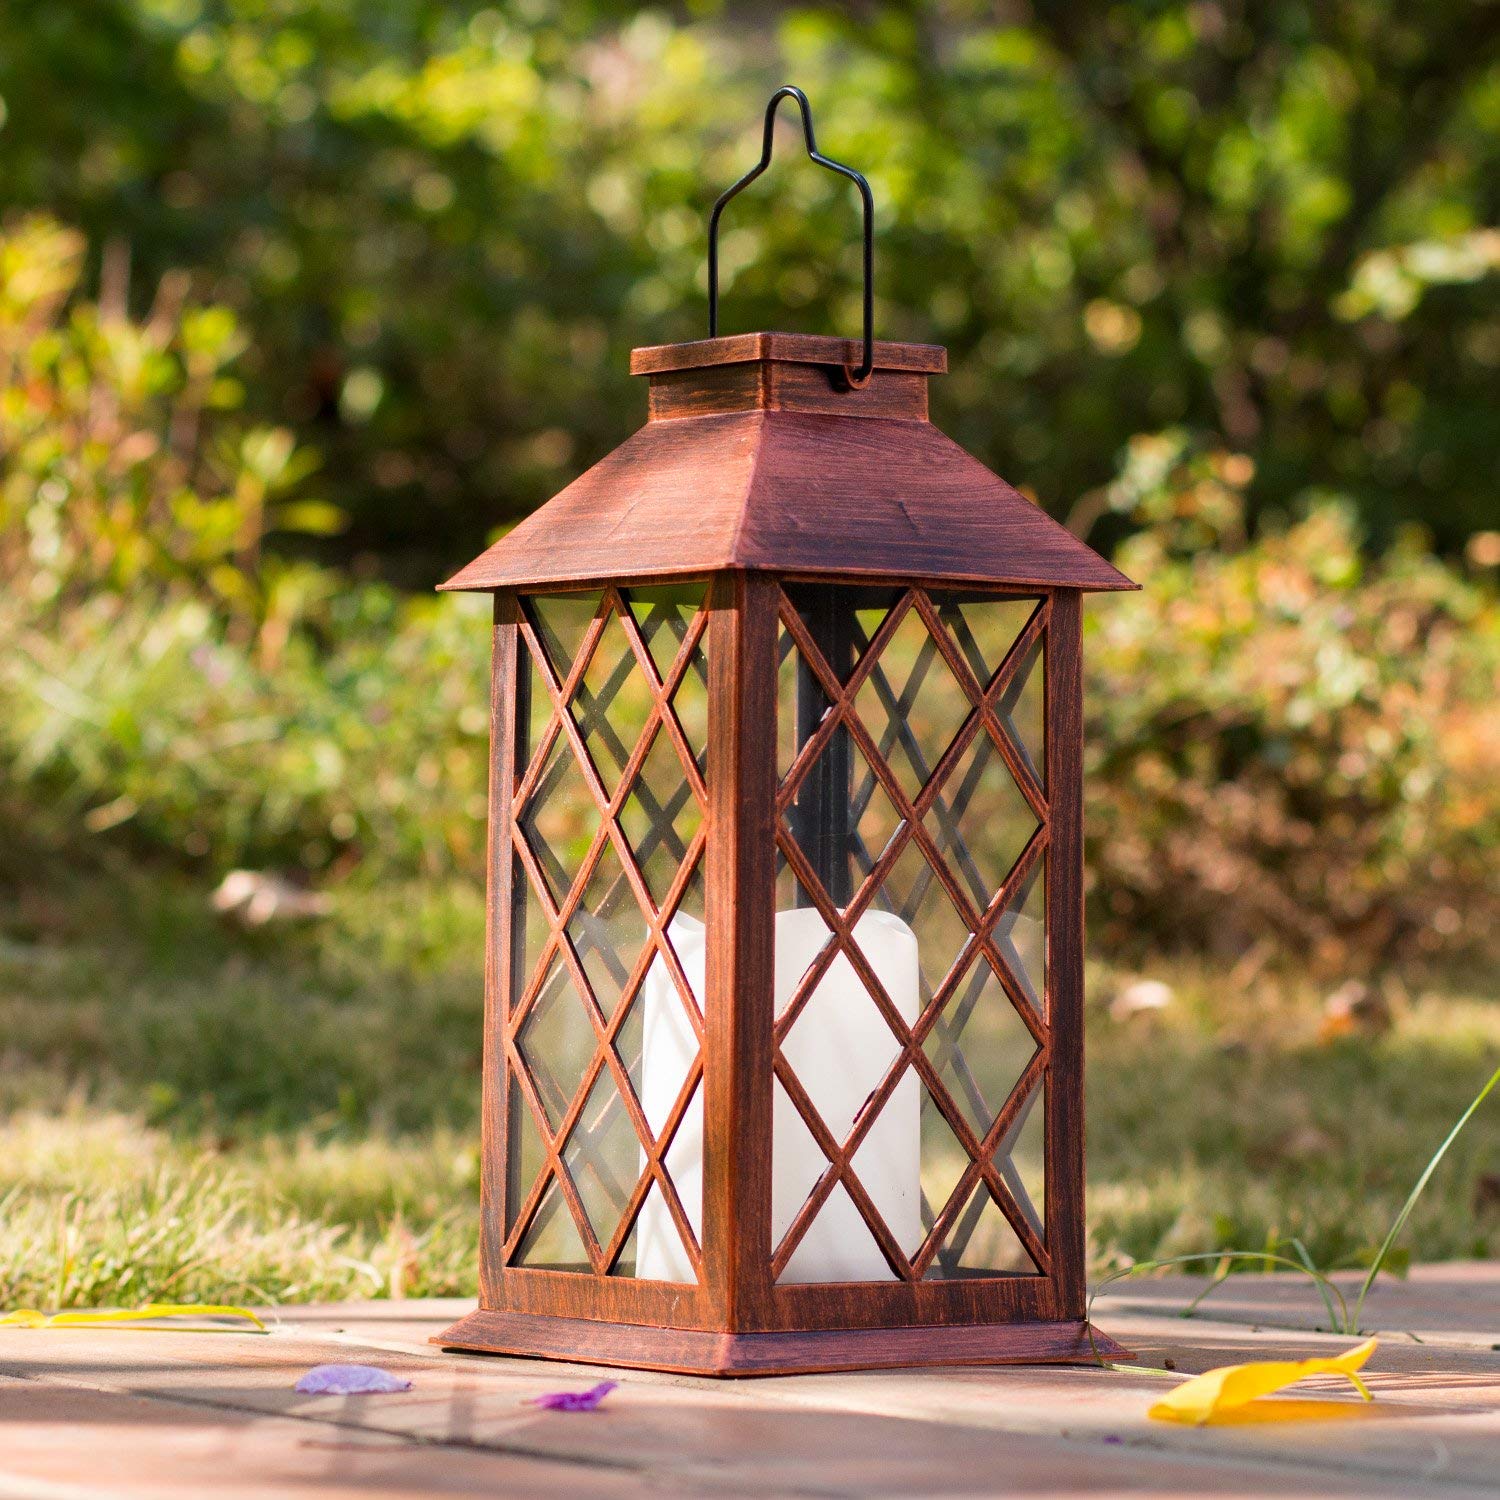 TAKE ME Solar Lantern,Outdoor Garden Hanging Lantern-Waterproof LED Flickering Flameless Candles Mission Lantern for Table,Outdoor,Party